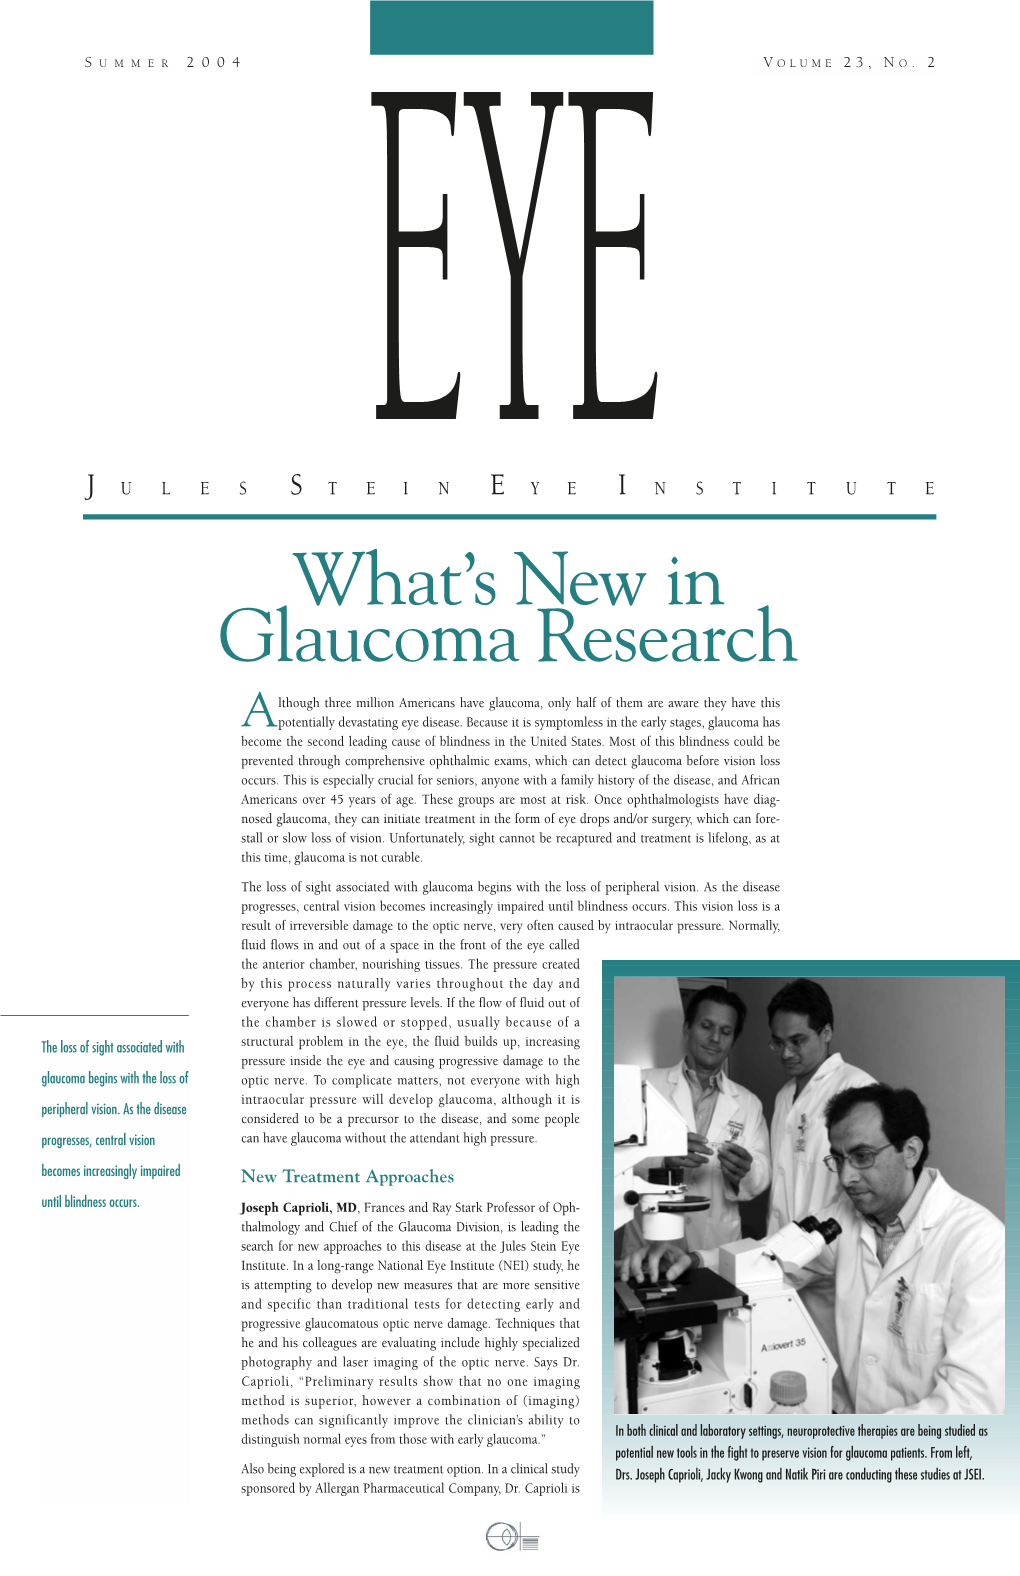 What's New in Glaucoma Research